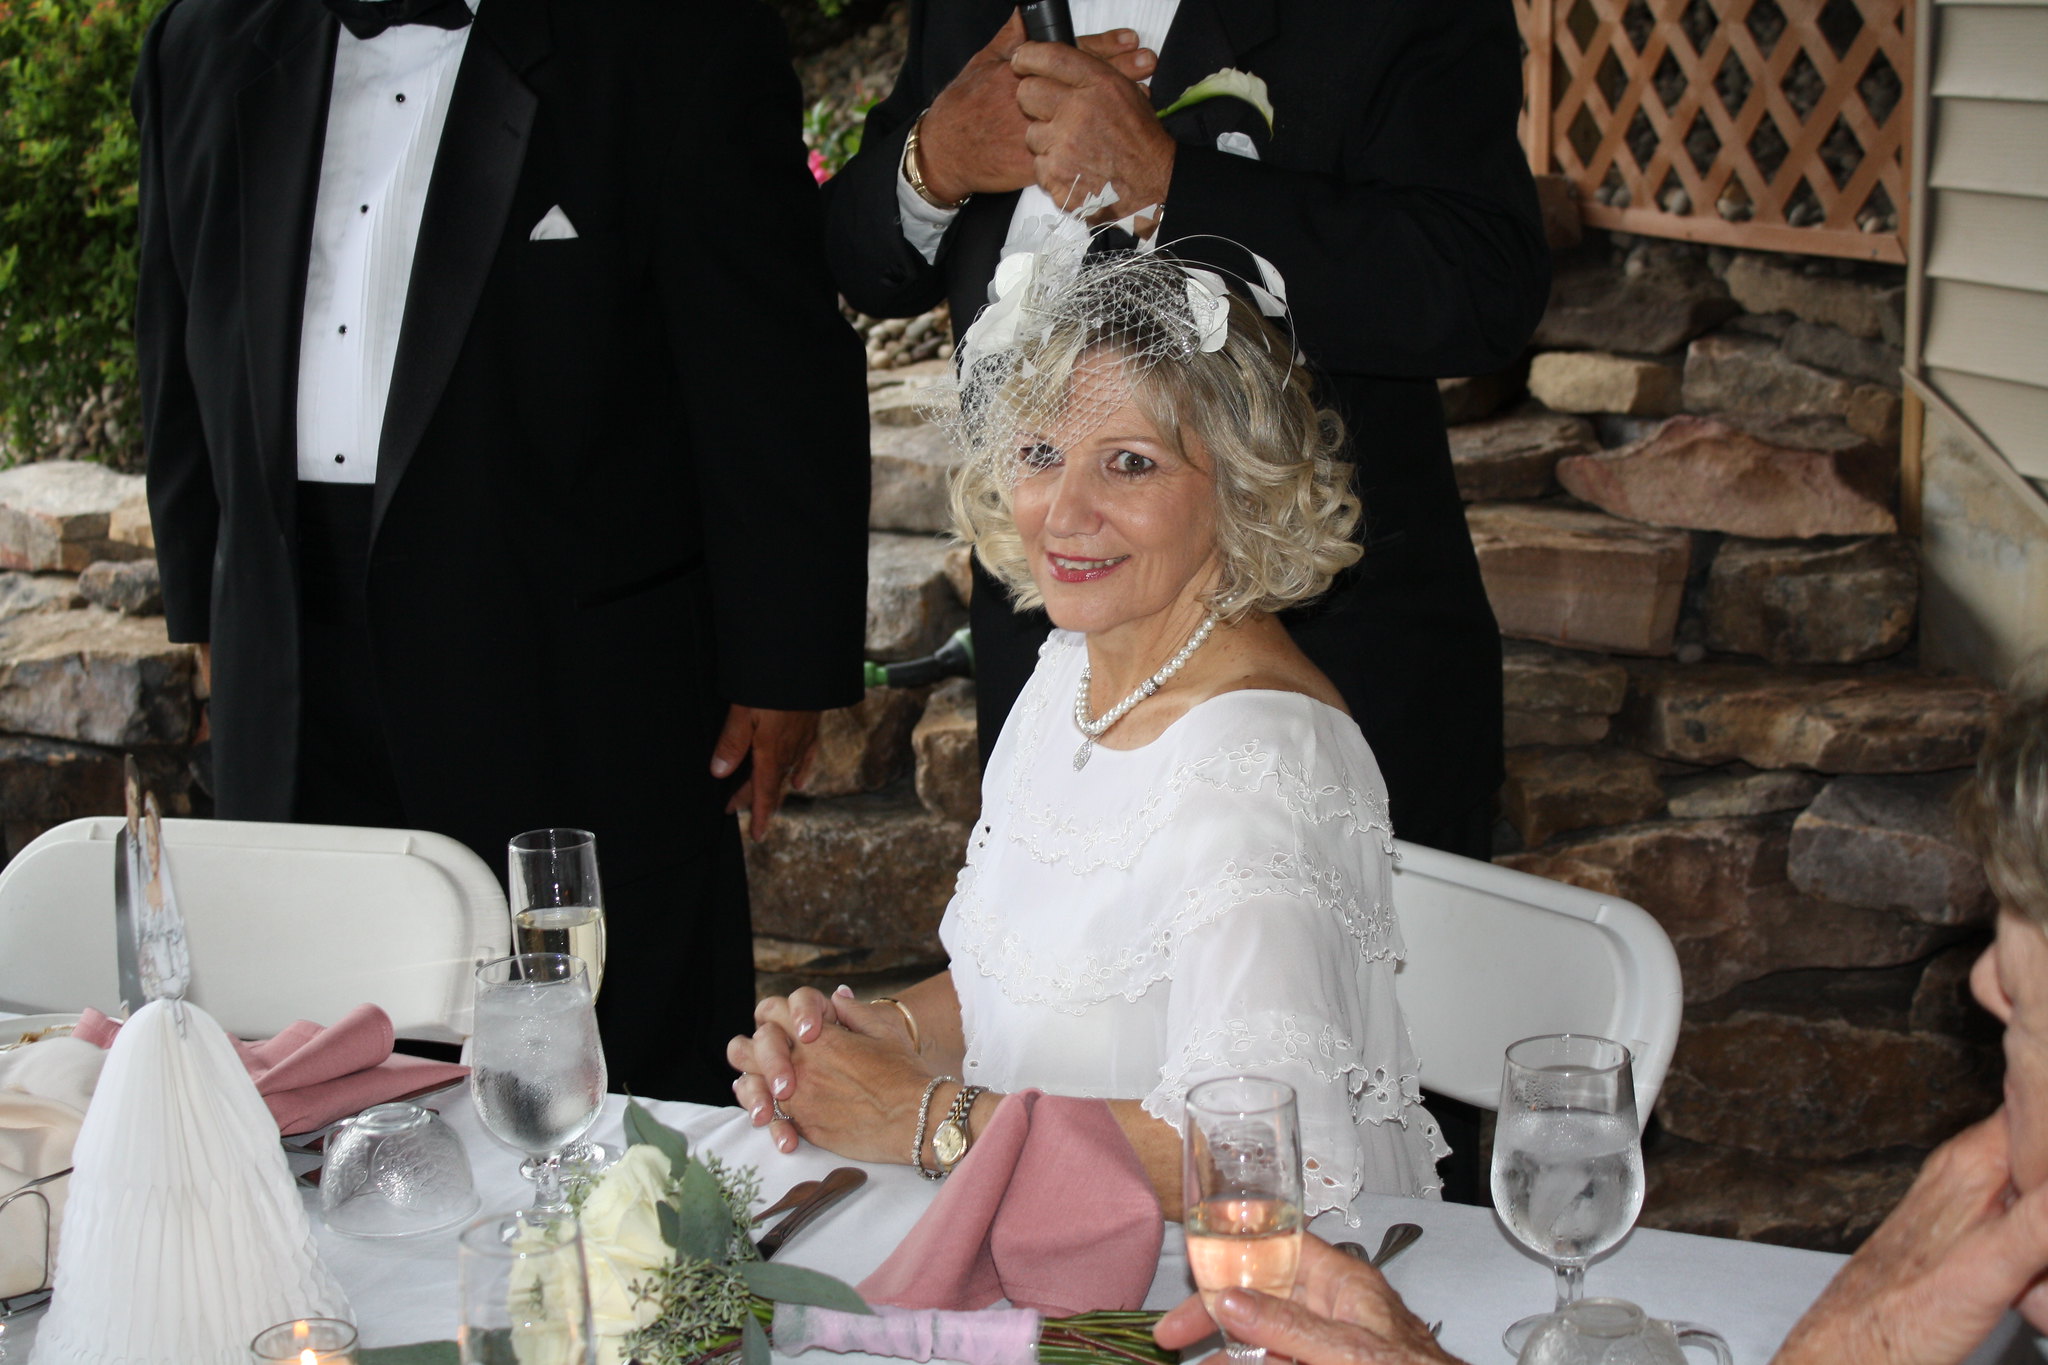 An older woman dressed in all white with a white fascinator | Source: Brett Levy on Flickr